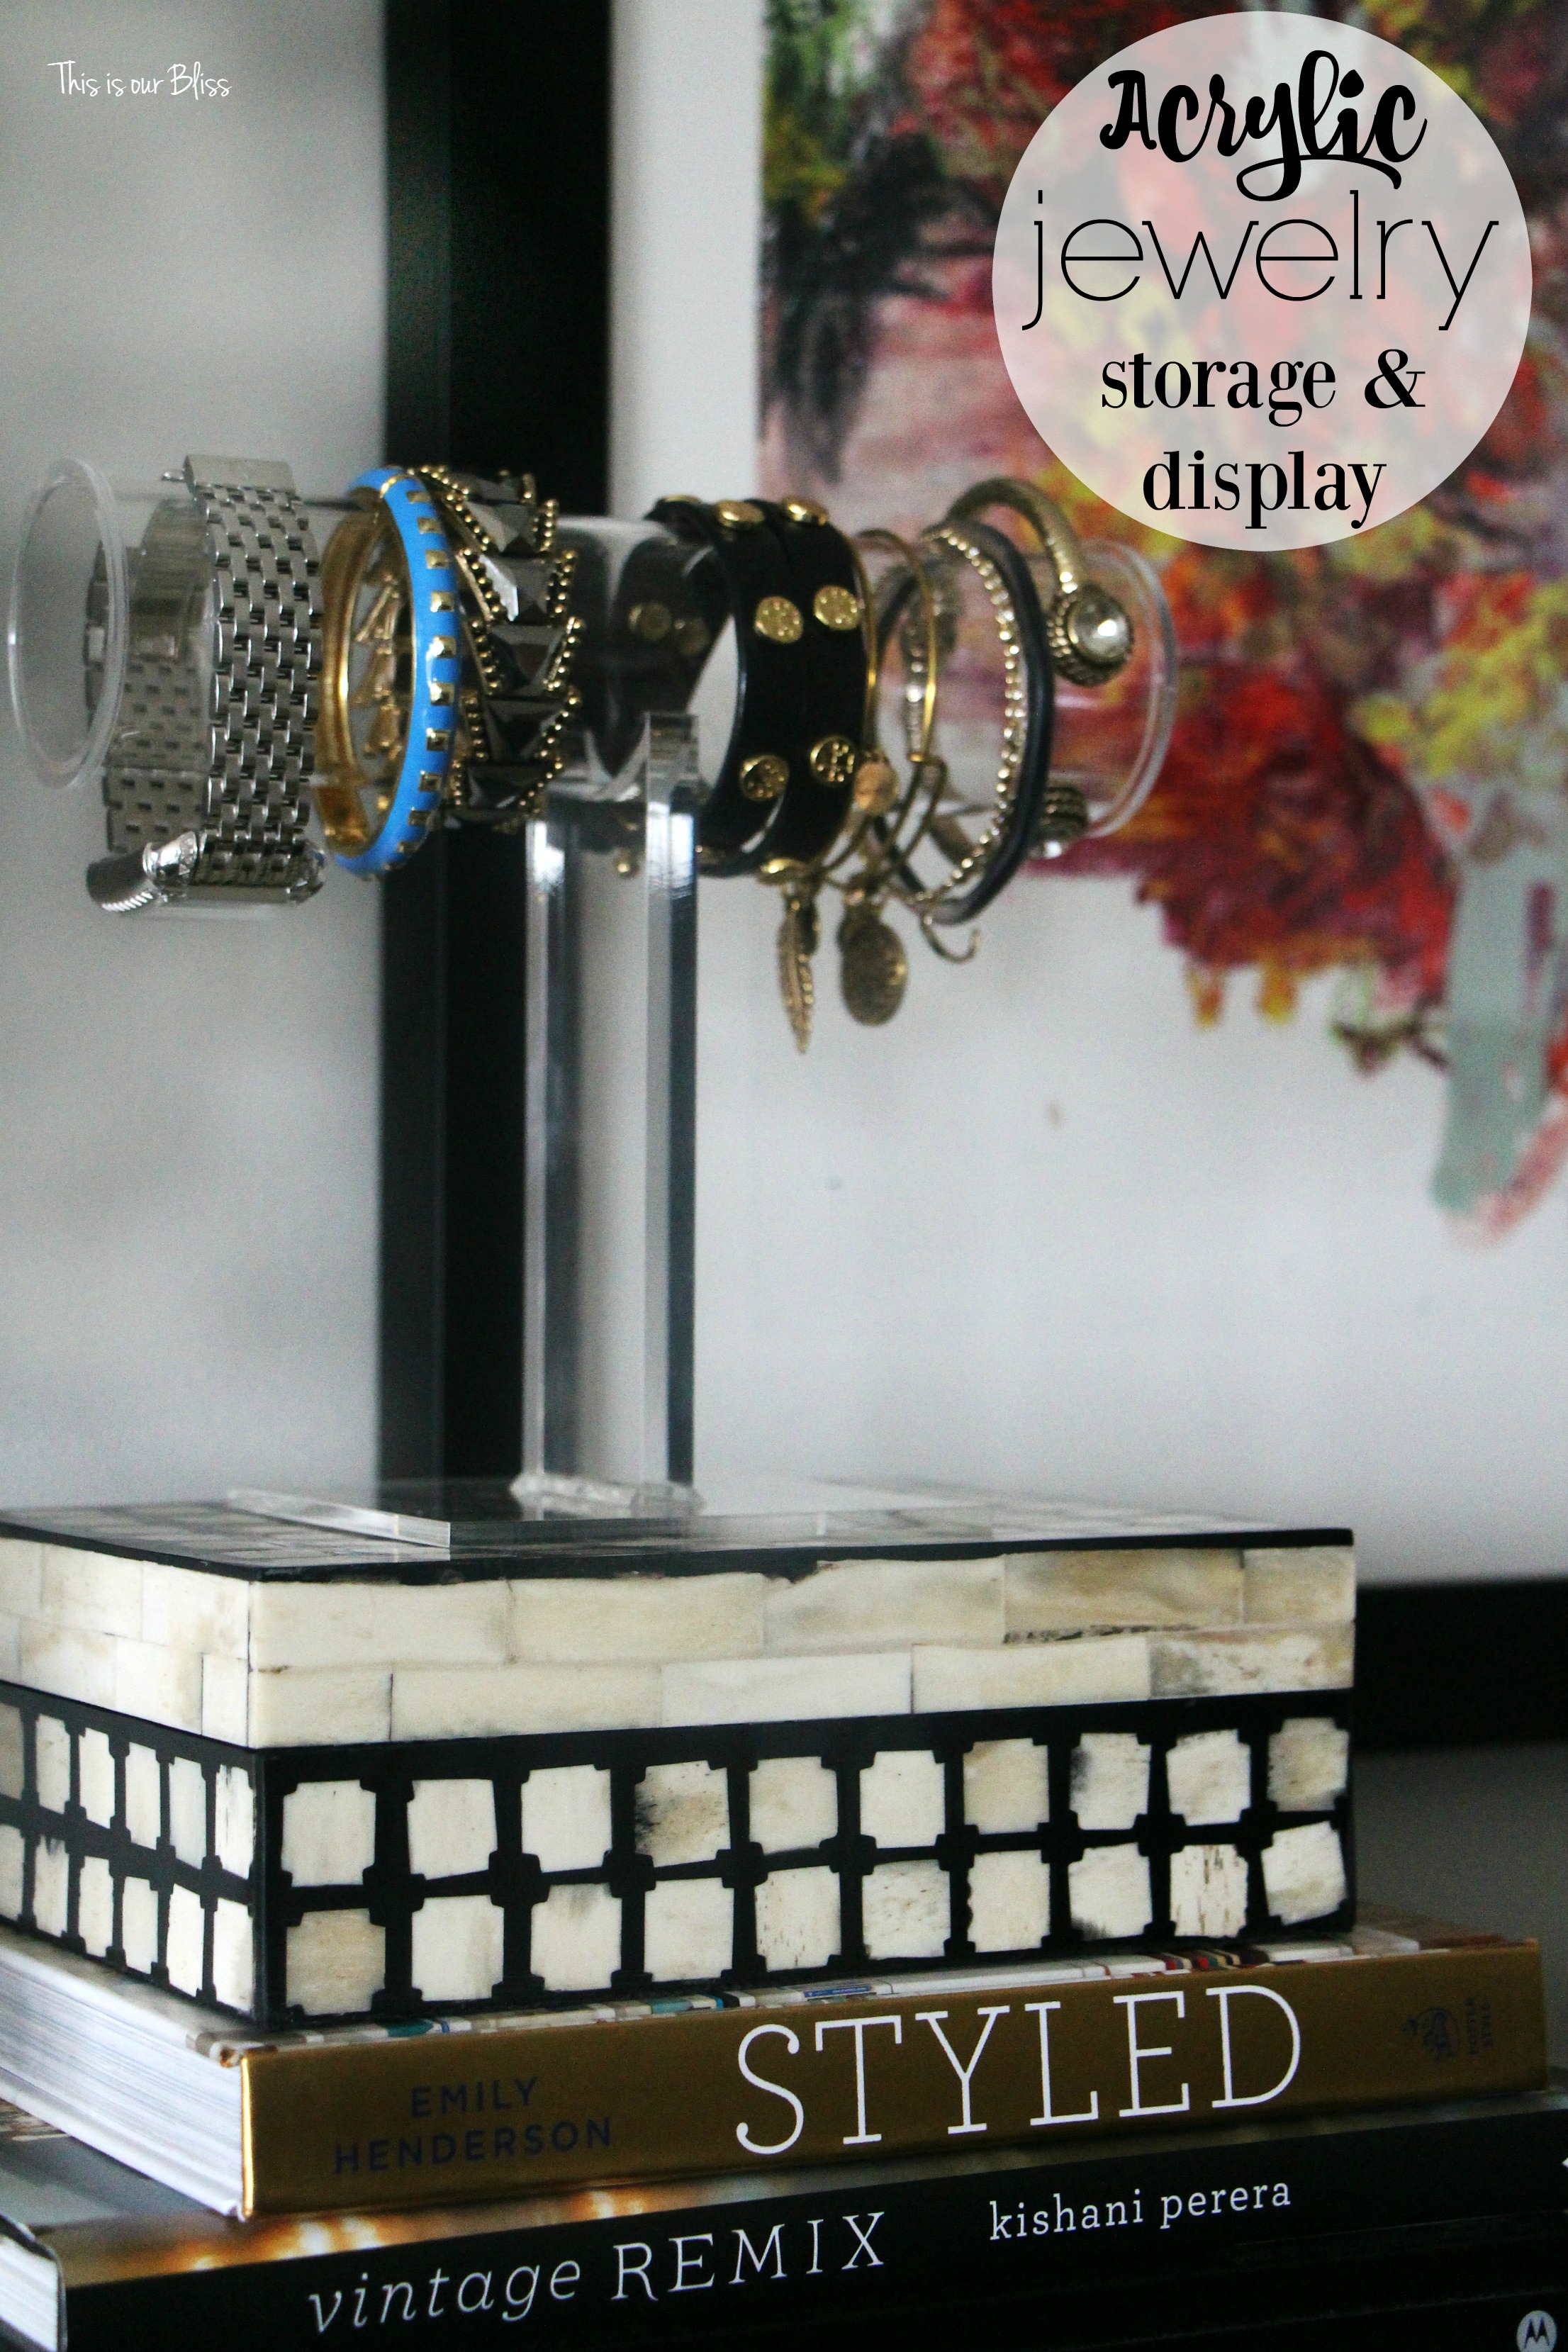 Acrylic jewelry storage & display | new year, new room refresh challenge - Master bedroom refresh - gold decor - TV gallery wall - minted art || This is our Bliss - www.thisisourbliss.com